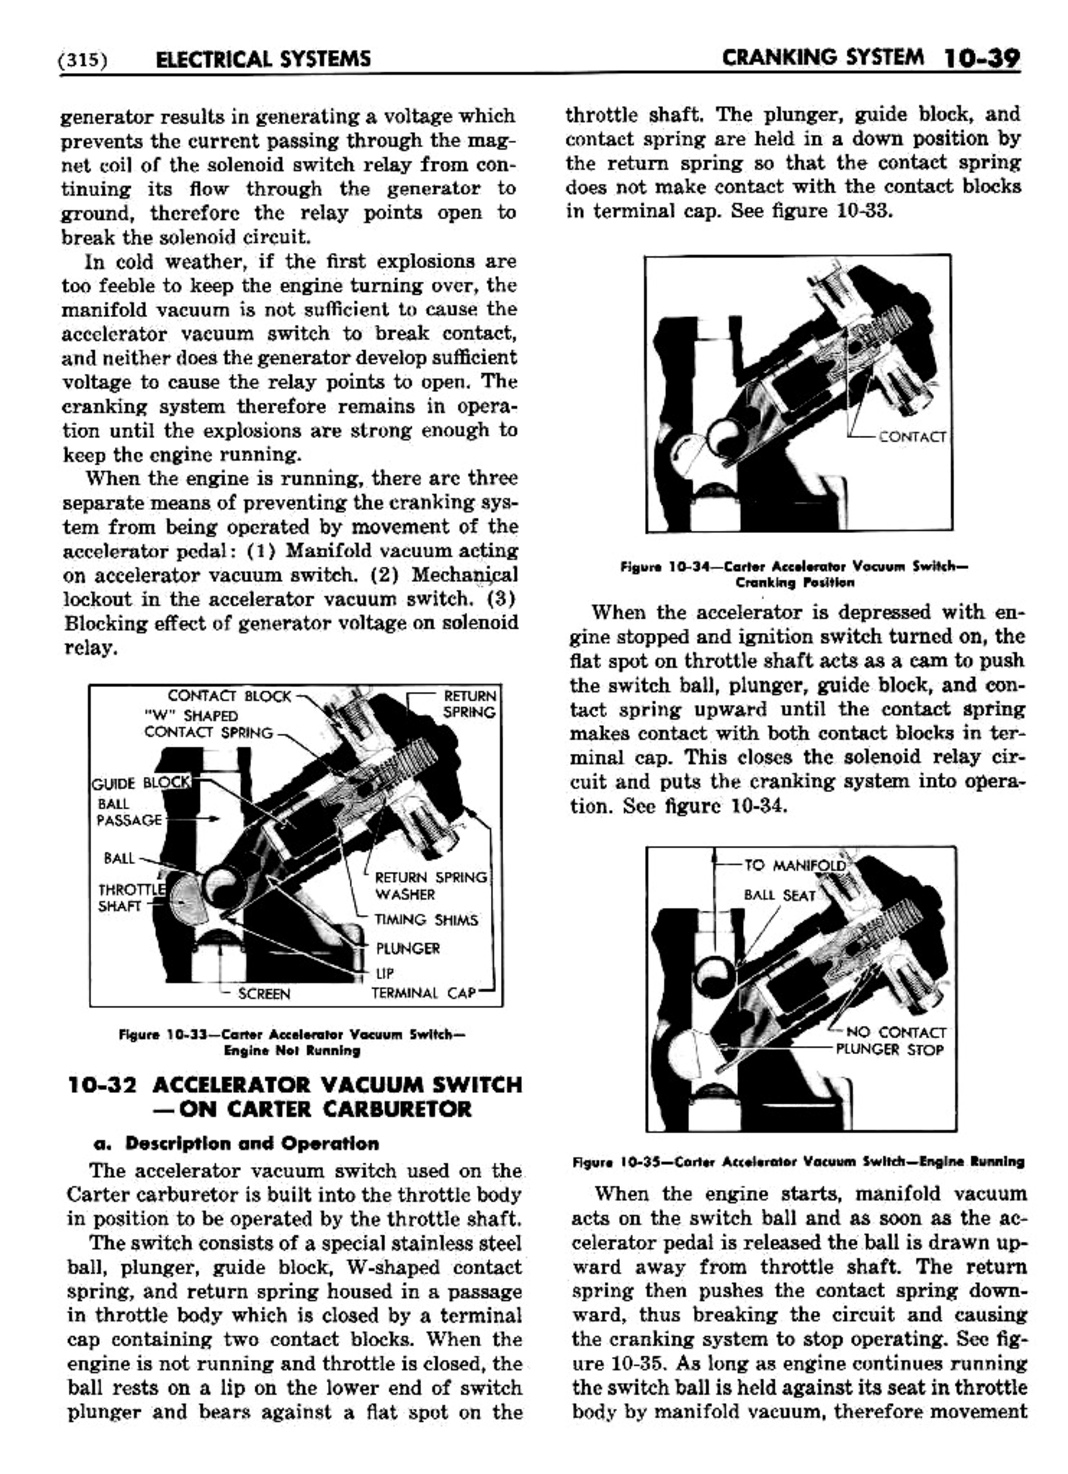 n_11 1948 Buick Shop Manual - Electrical Systems-039-039.jpg